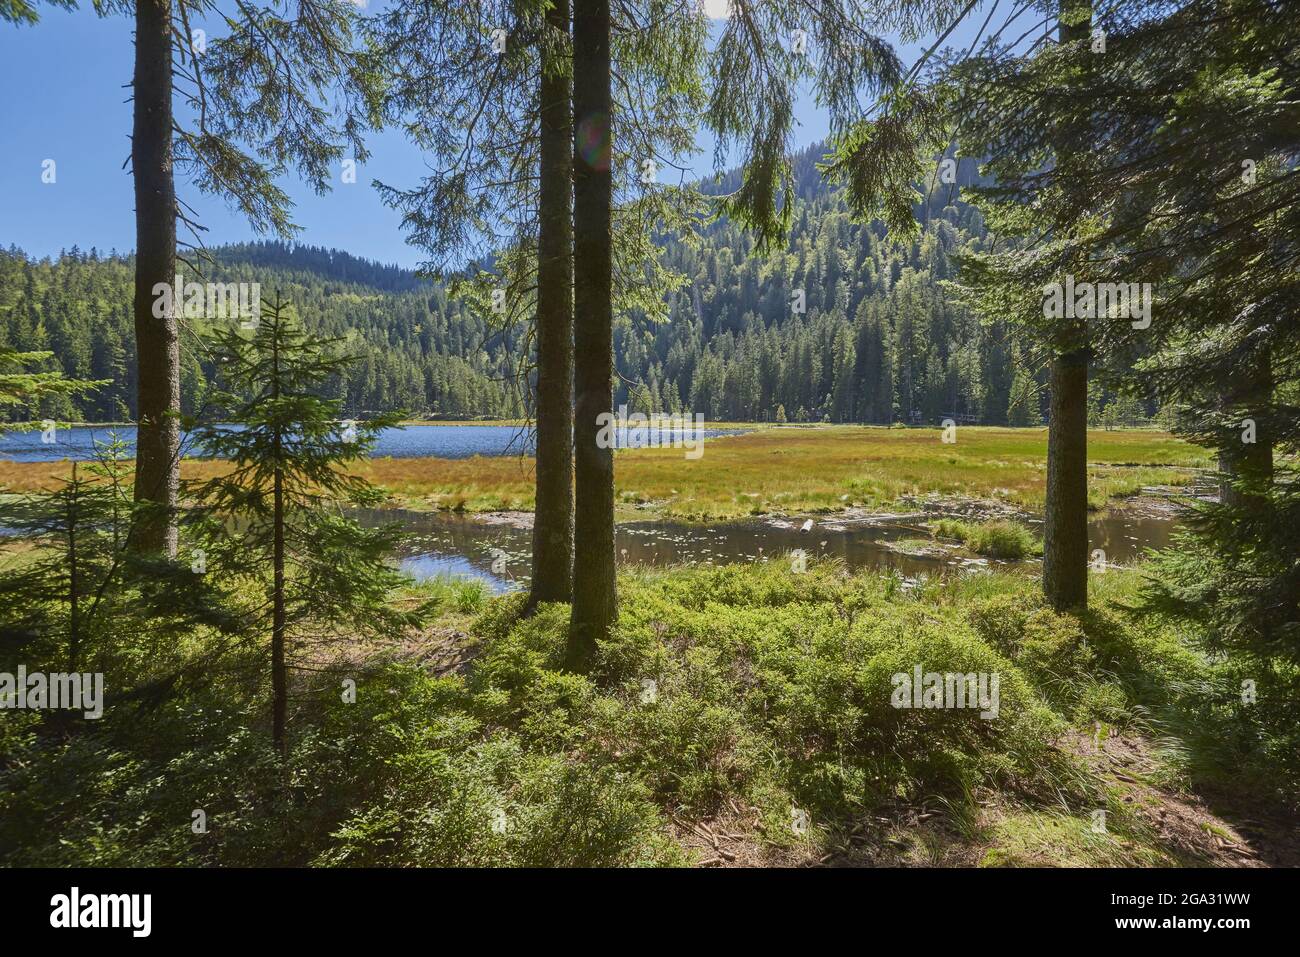 Norway spruce (Picea abies) trees in front of lake Arbersee, Bavarian Forest National Park; Bavaria, Germany Stock Photo